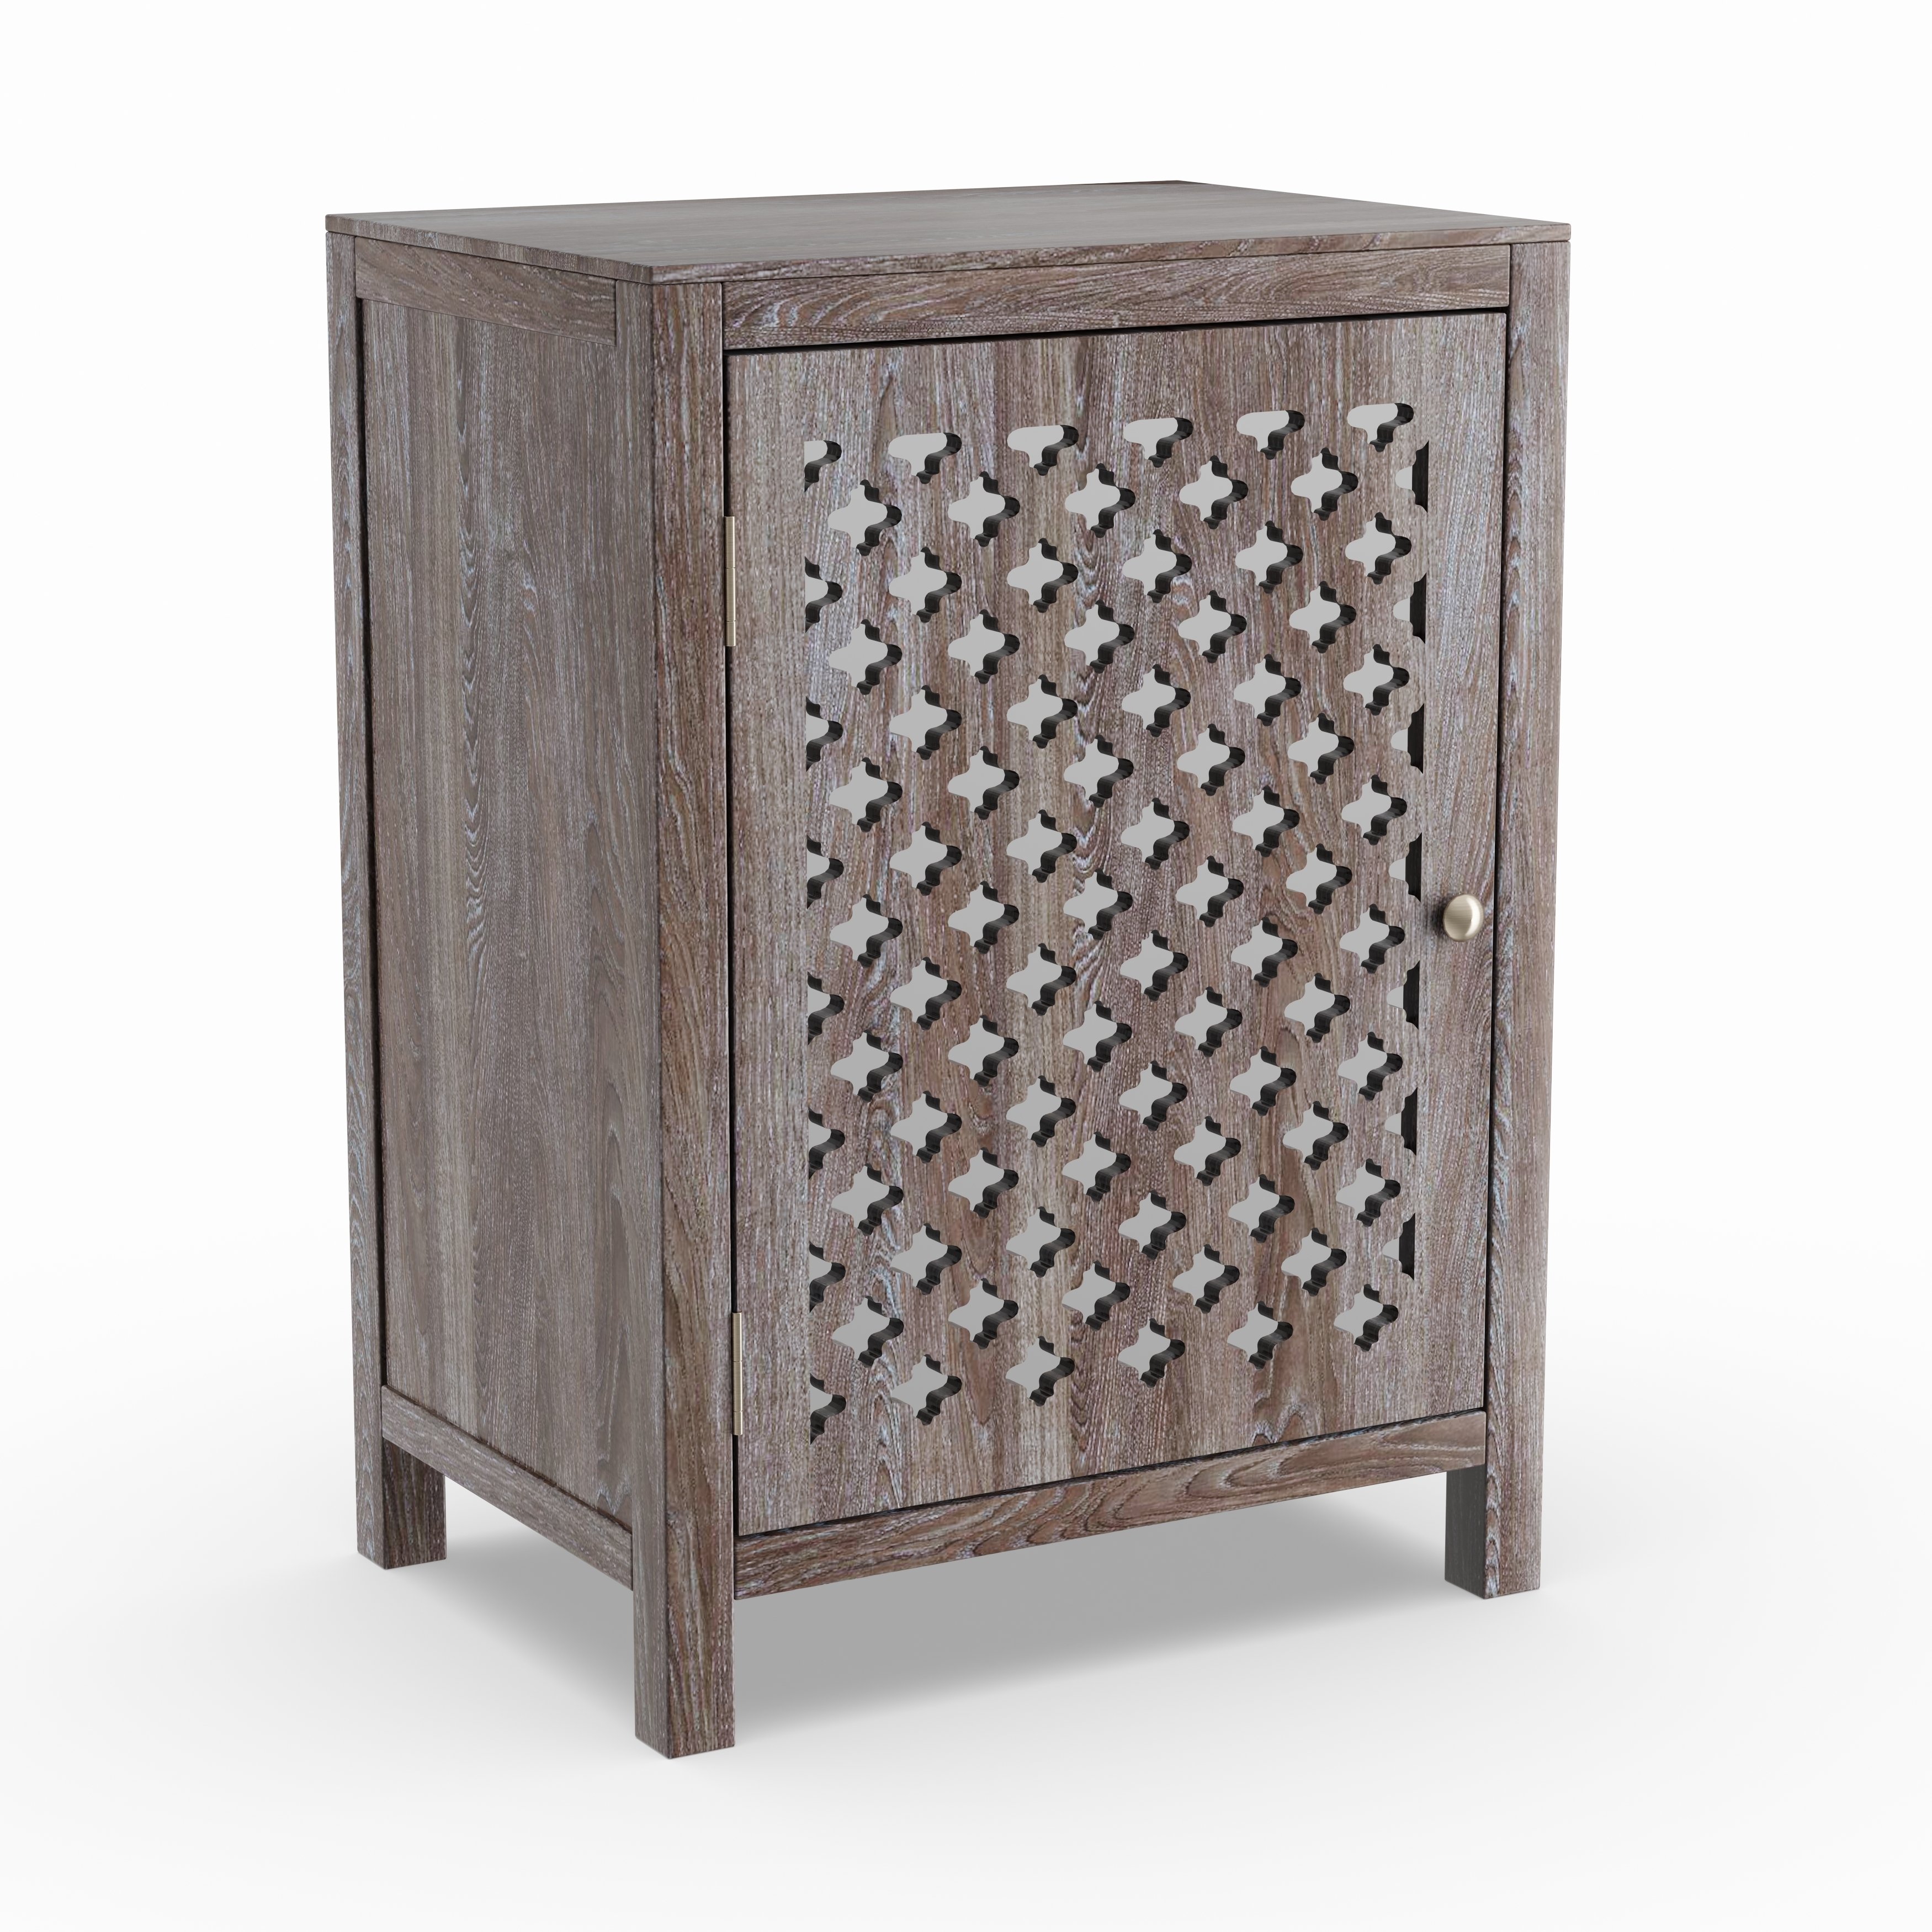 the curated nomad tabitha distressed grey quatrefoil end table maison rouge anatole with mirror accent free shipping today mohawk home rugs lanterns turquoise console outdoor